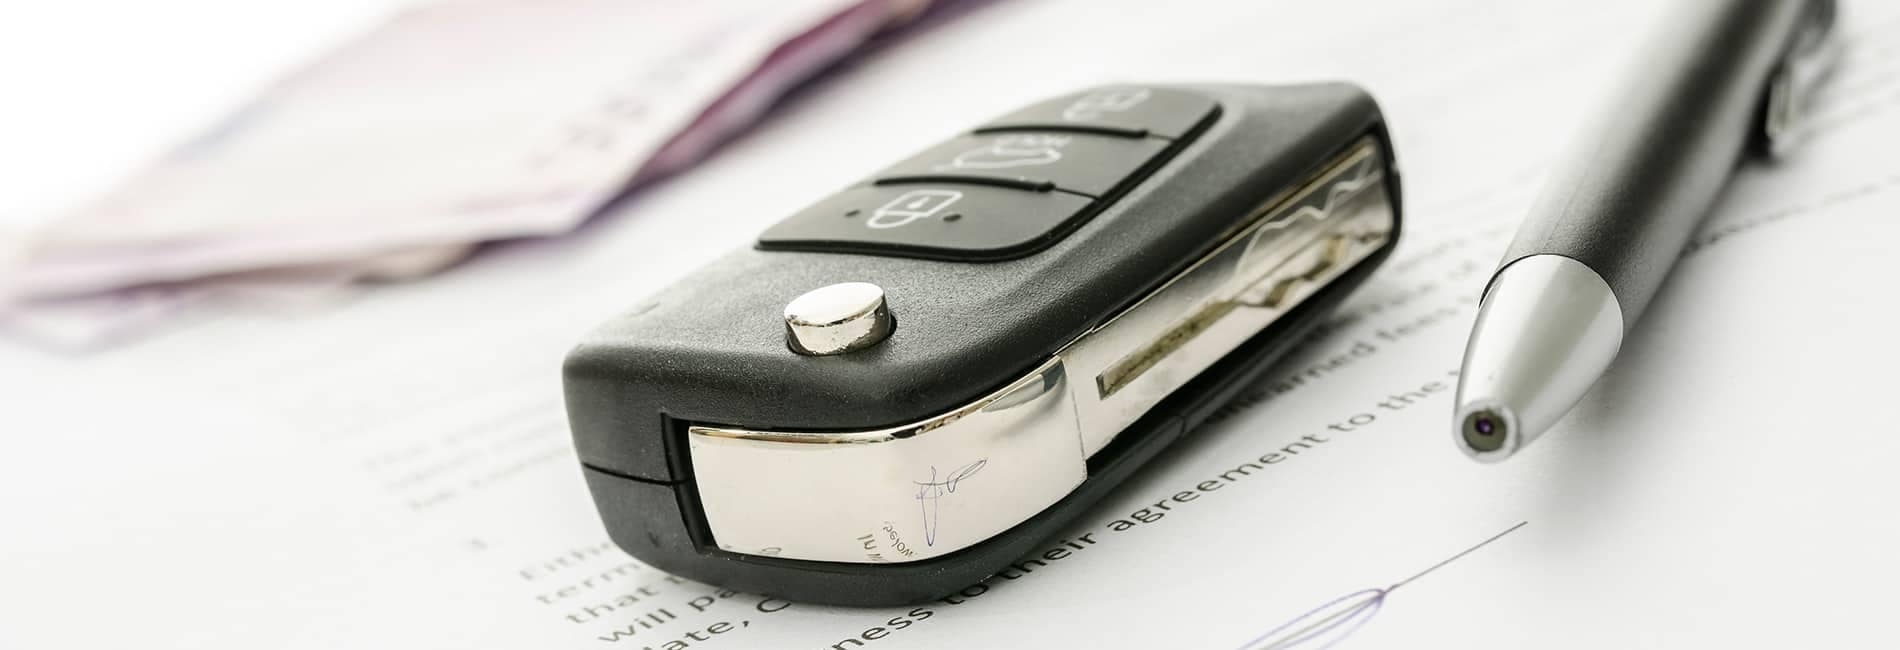 Vehicle key fob on top of a finance agreement